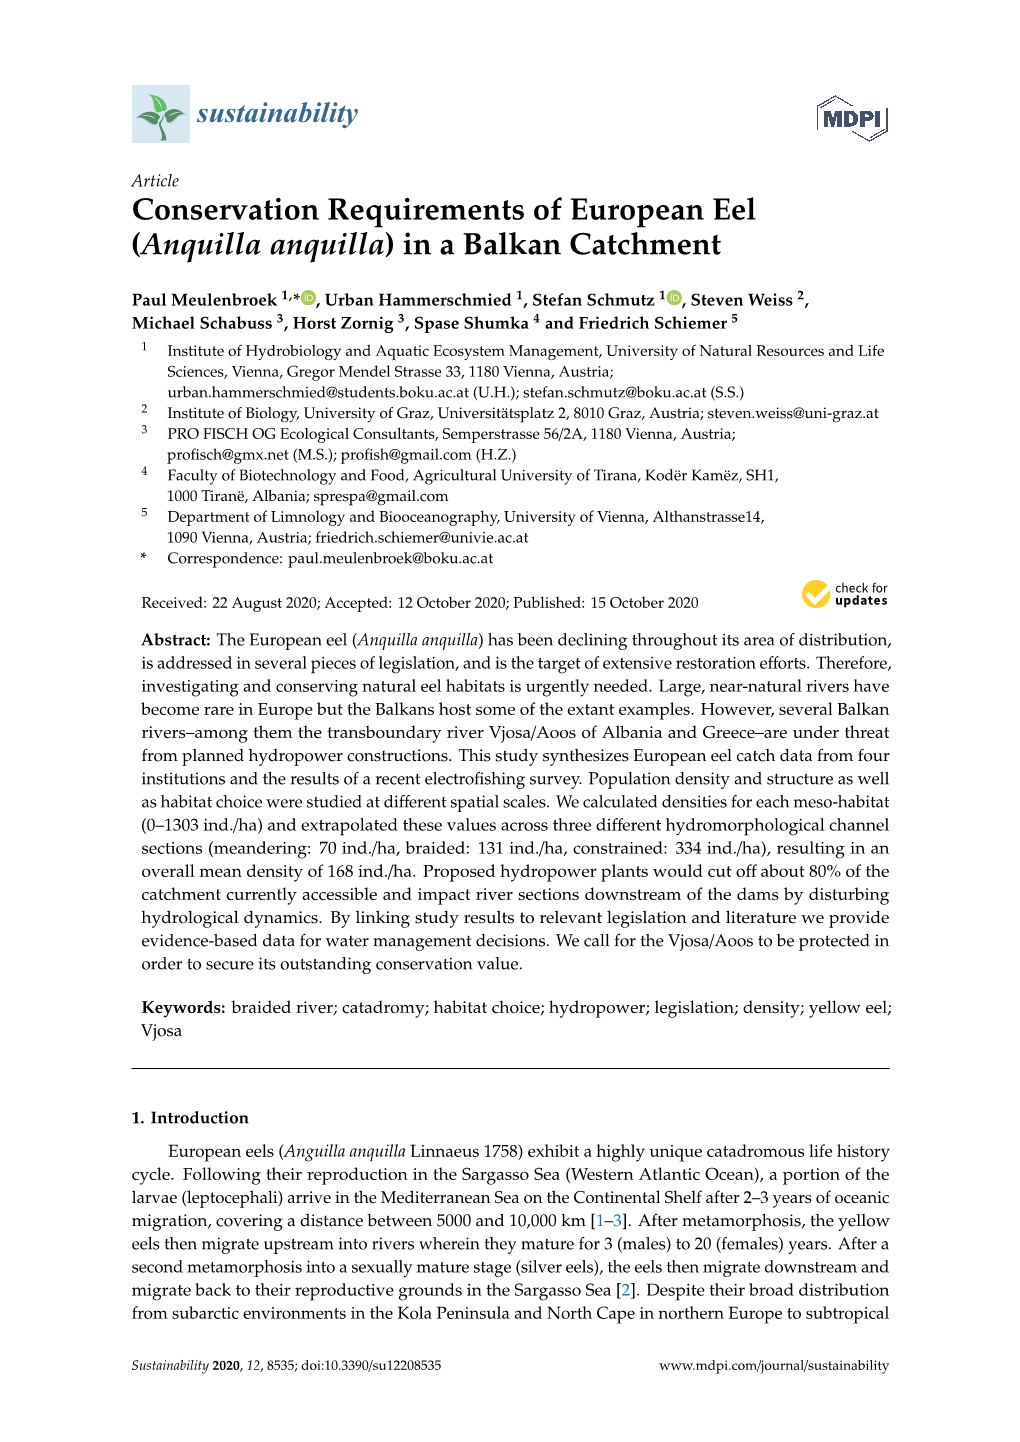 Conservation Requirements of European Eel (Anquilla Anquilla) in a Balkan Catchment